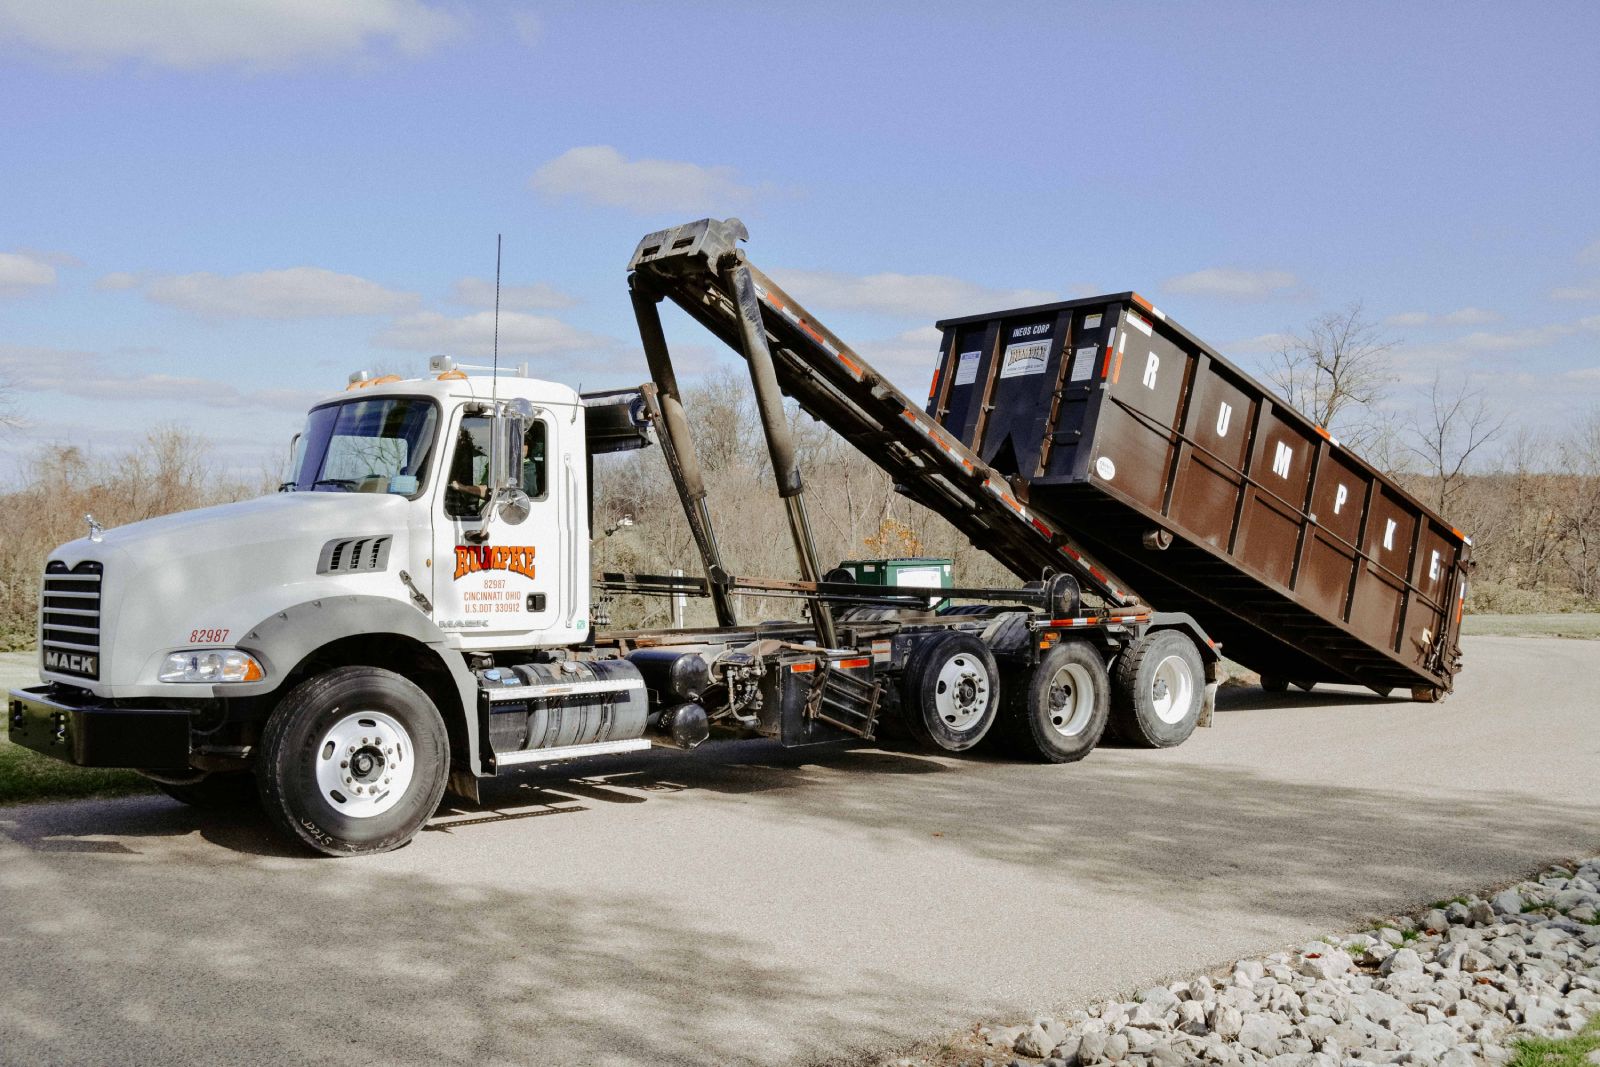 Rumpke Truck Dropping Roll Off Dumpster For Business Waste